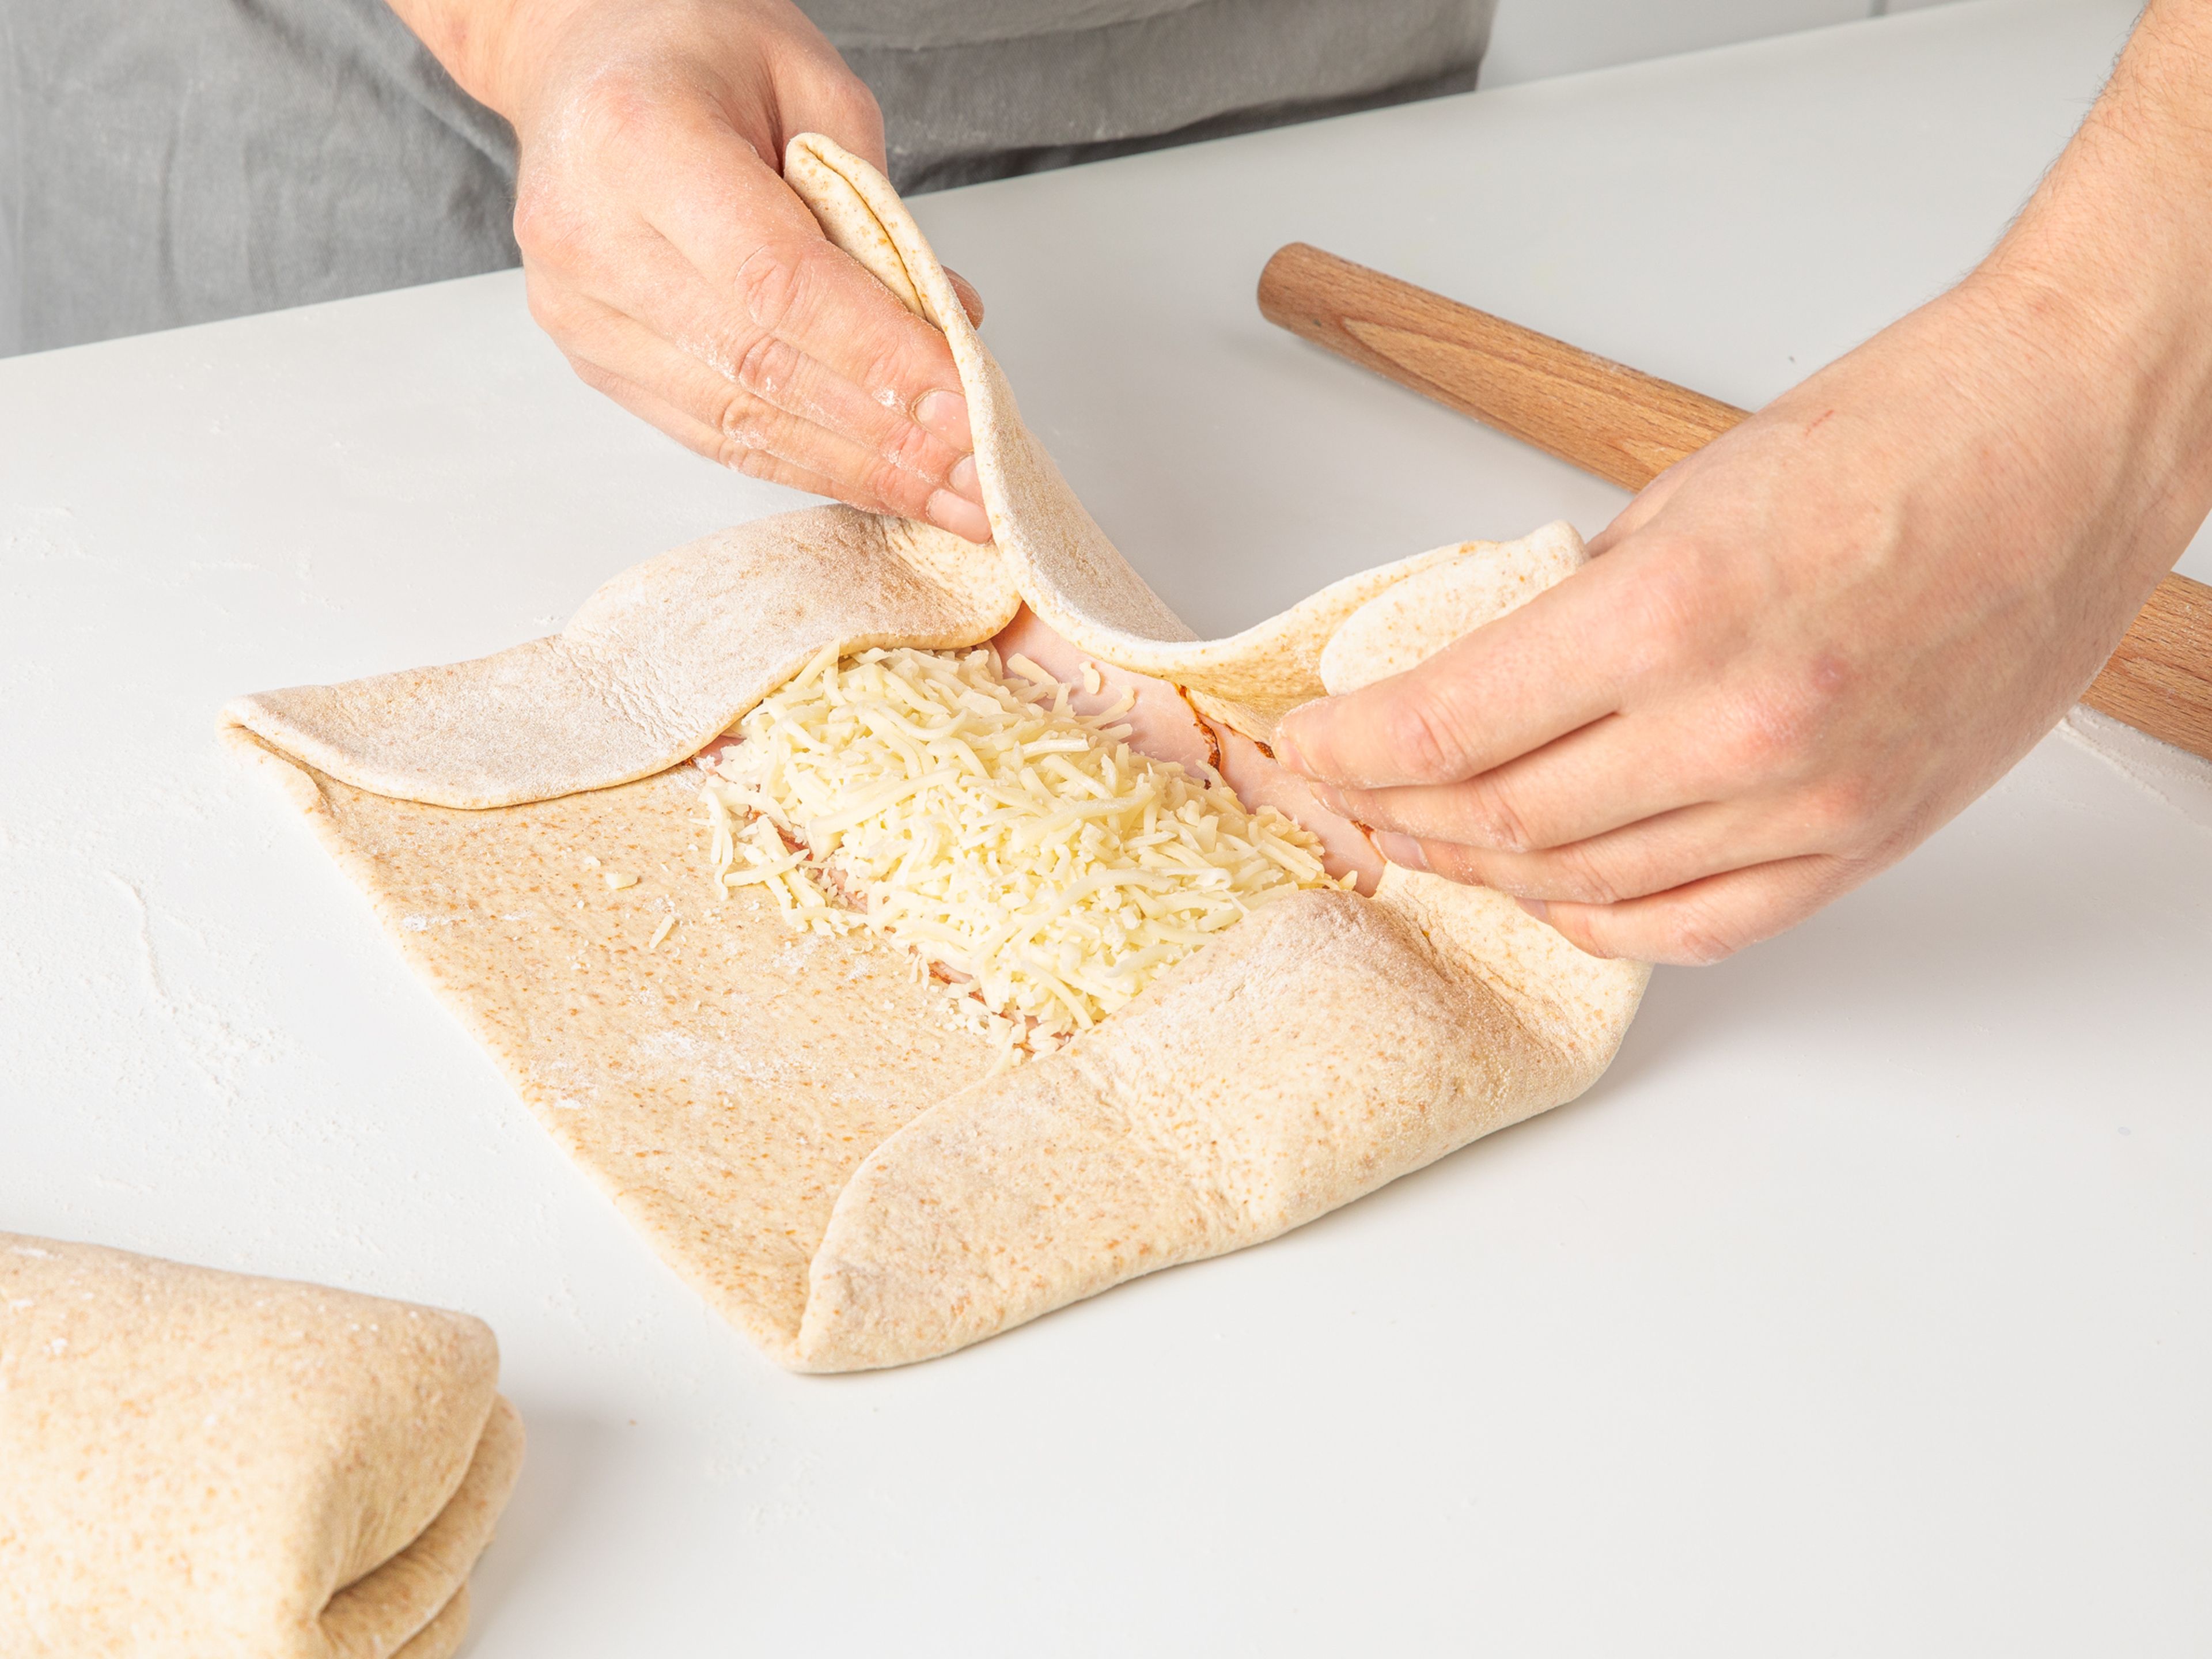 Preheat the oven to 200°C/390°F. Once the dough is ready, remove it from the bowl and place it on a flour-dusted work surface. Divide the dough in half. Roll out each piece into a long rectangle. Add ham and cheese to the center of the rectangle, leaving an approx. 5 cm/2 in. edge. Start by folding the two short sides inwards over the filling, then carefully fold the two long sides over to seal it. Turn the filled pastry roll, so that the seam side is facing down.